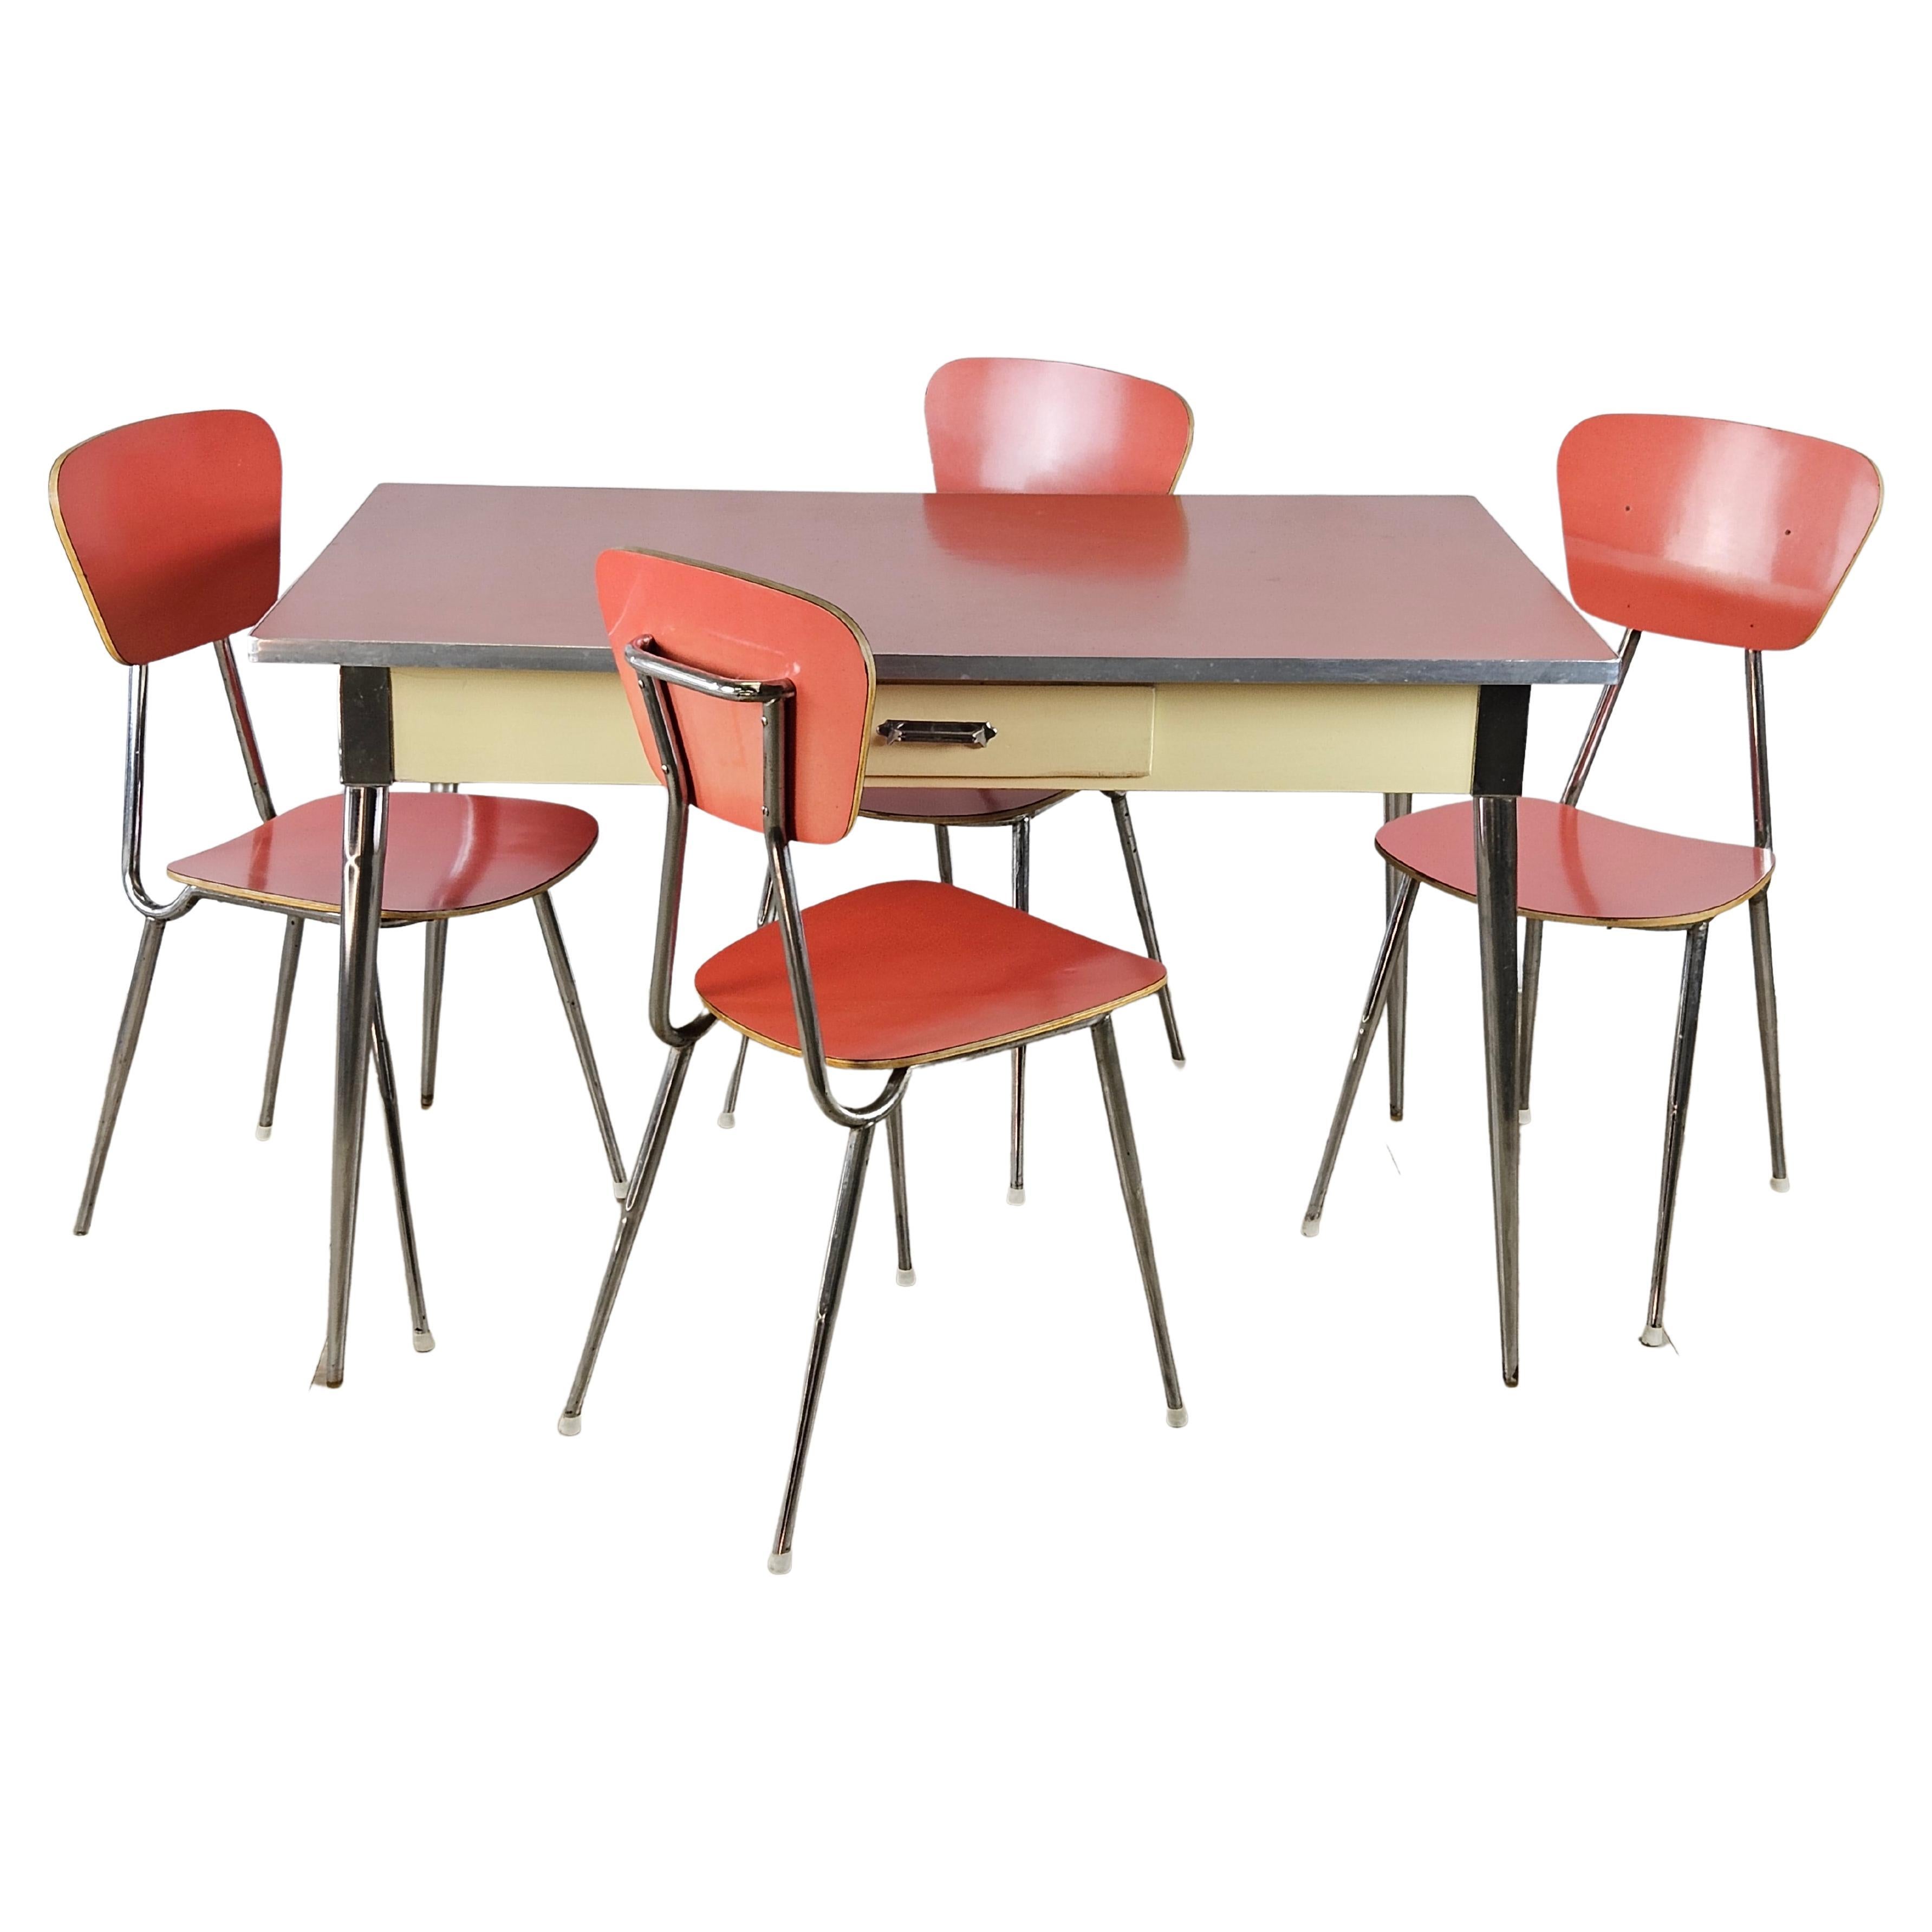 Dining set with red formica table and 4 chairs